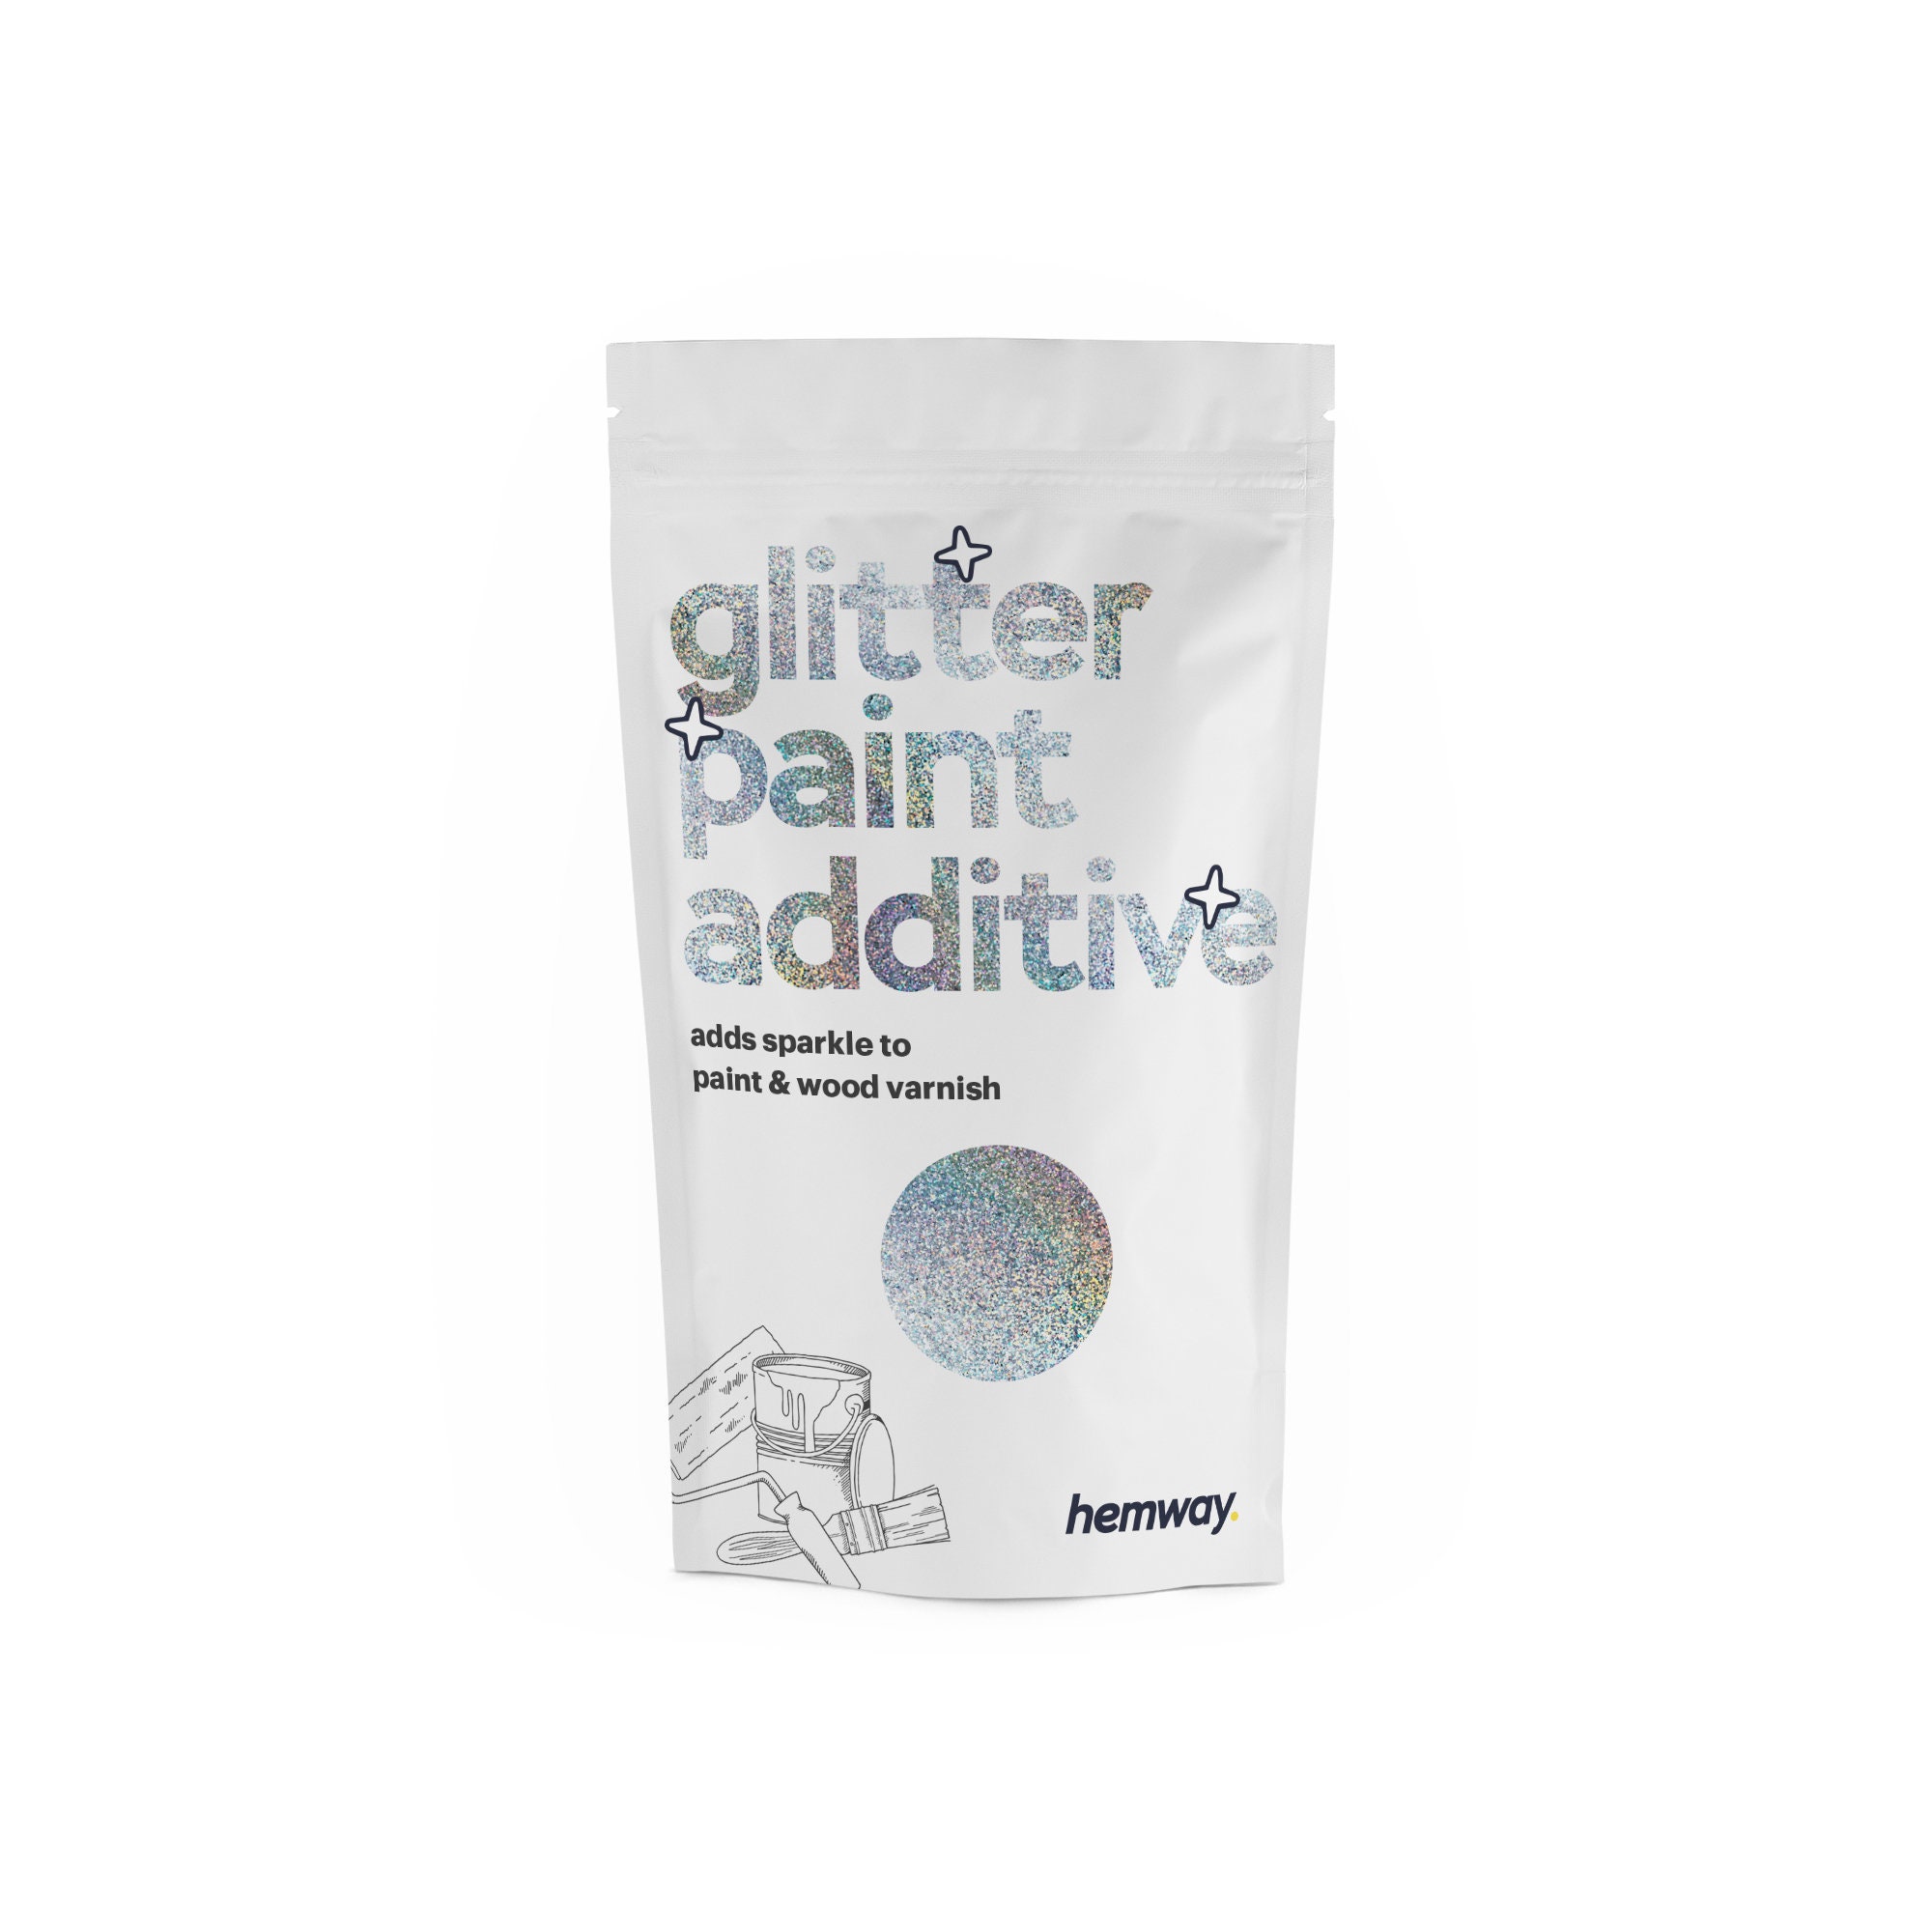 Hemway Glitter Paint Crystals Additive 100g for Emulsion Acrylic